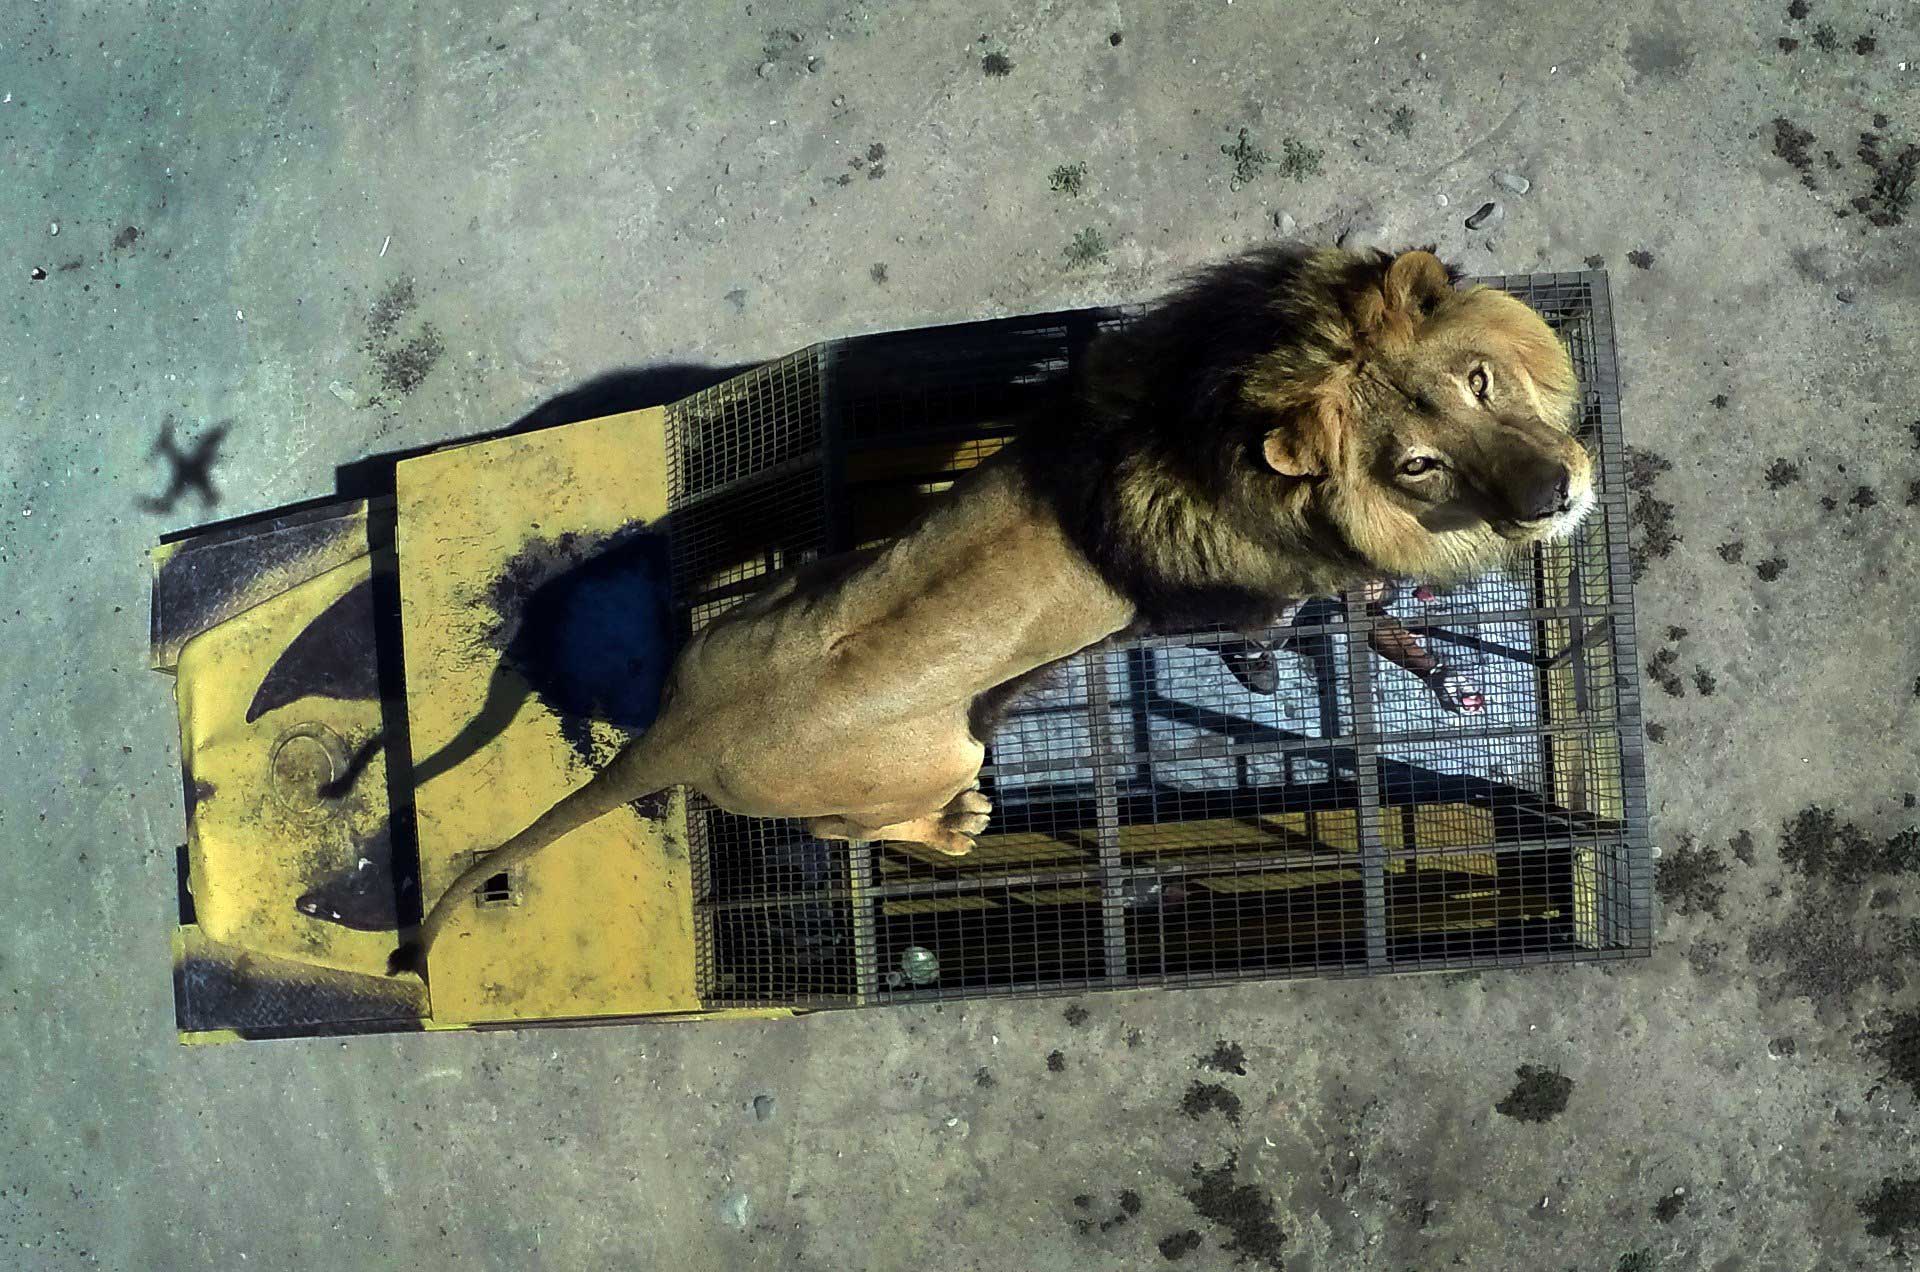 Top view of a lion on the cage of a vehicle at the Safari Lion Zoo in Rancagua, Chile, Oct. 30, 2014.